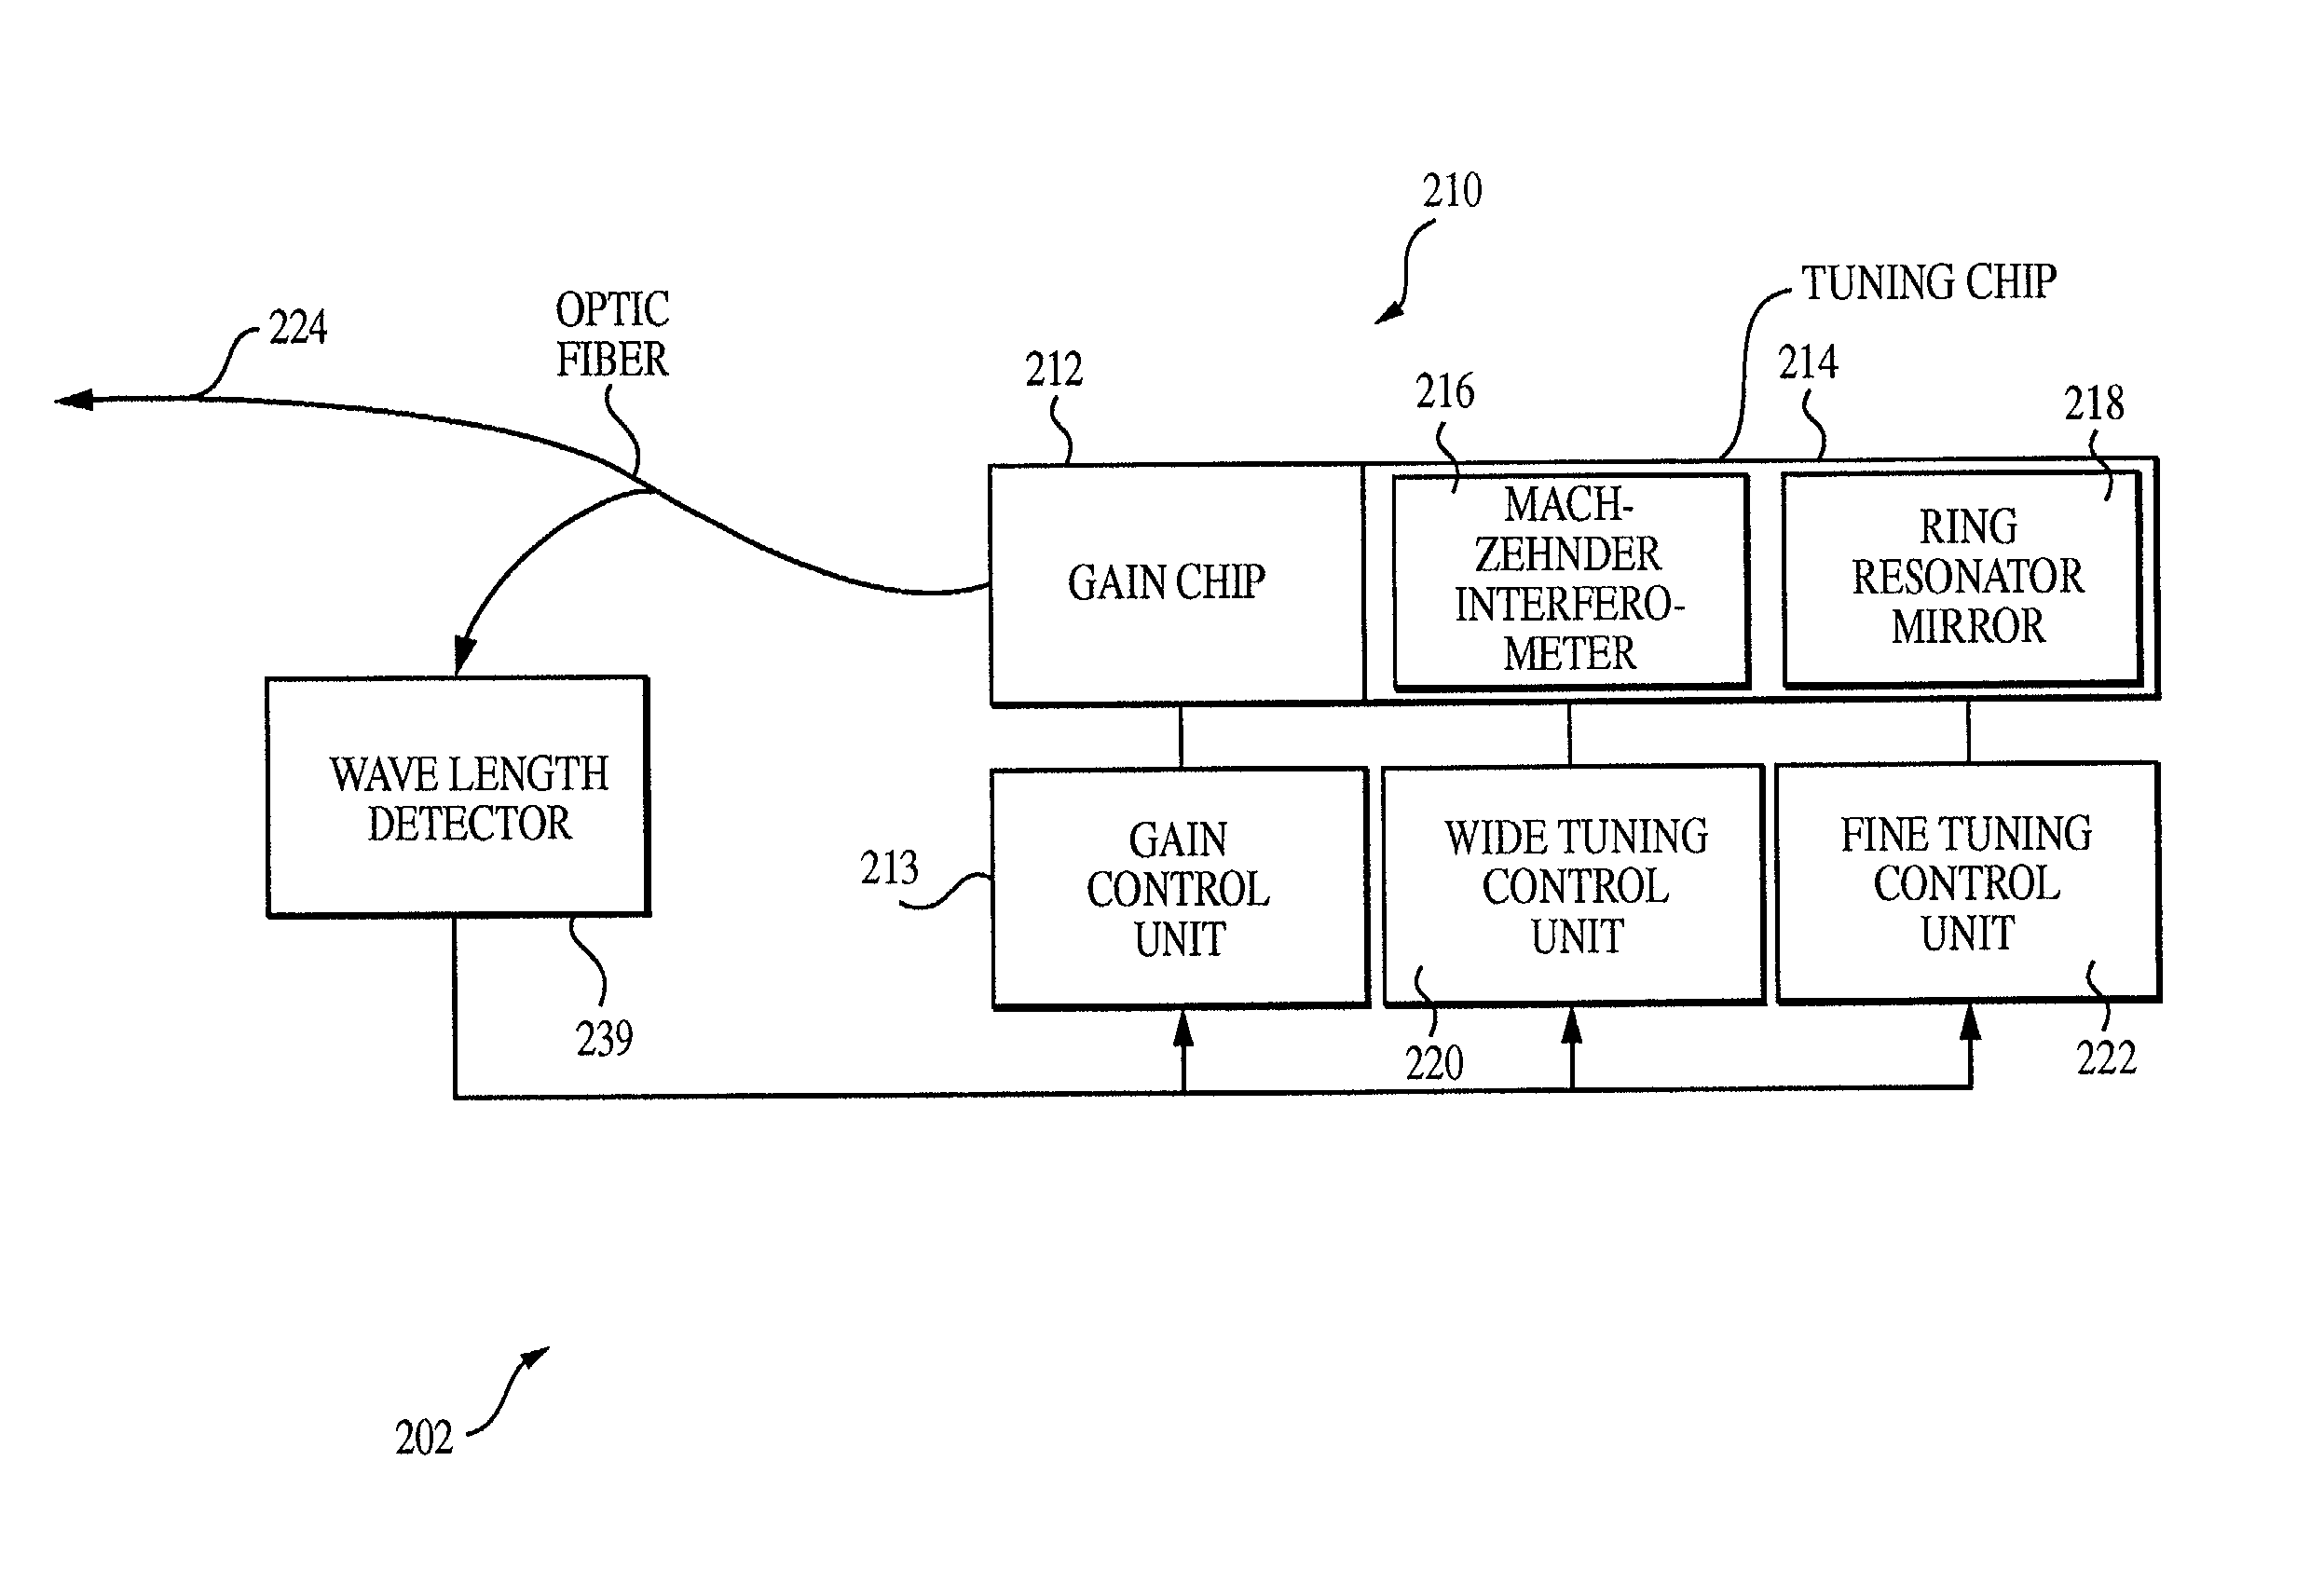 Tunable semiconductor laser having cavity with reflective Fabry-Perot etalon and Mach-Zehnder interferometer